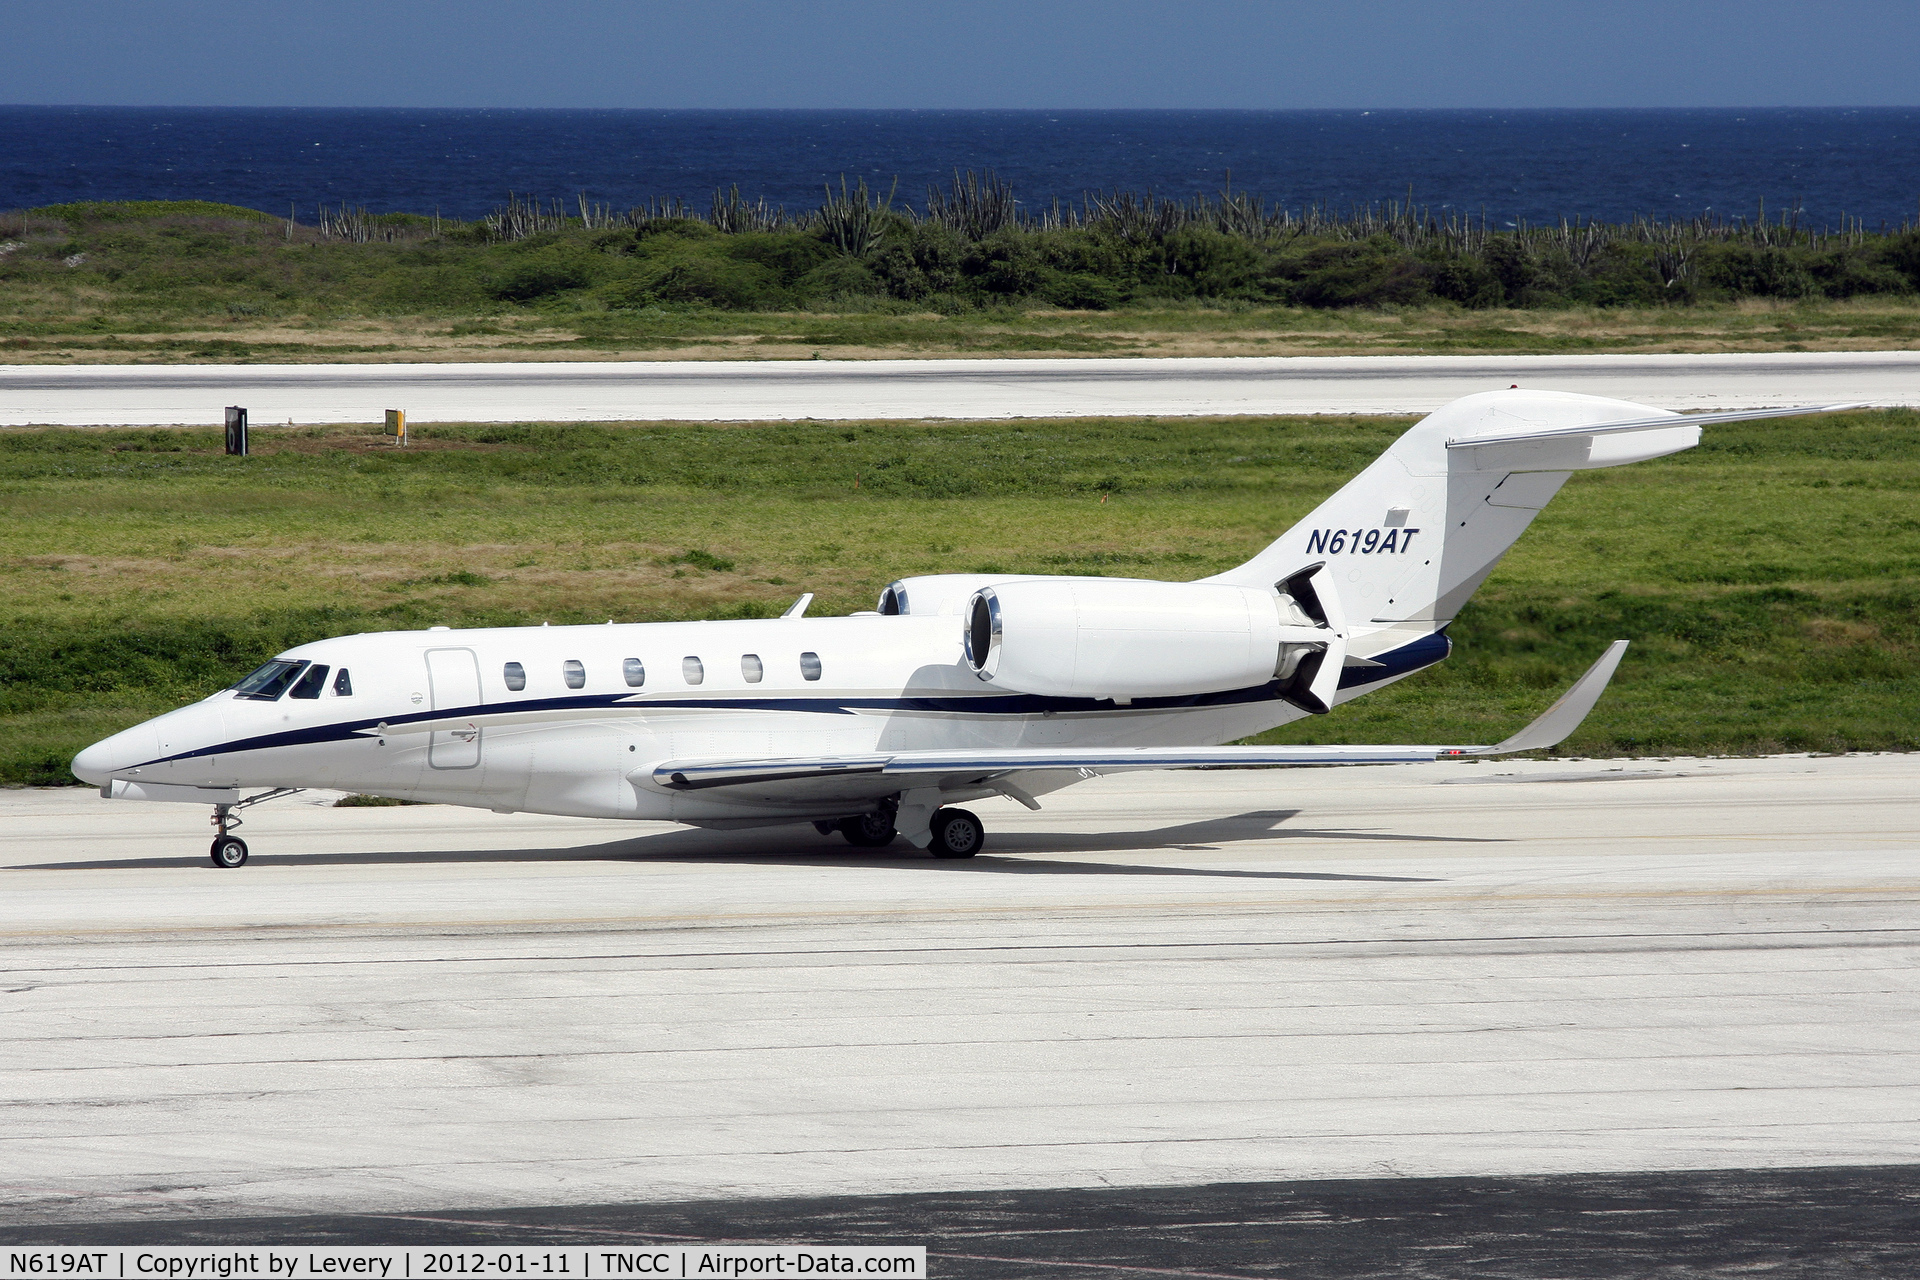 N619AT, 1997 Cessna 750 Citation X Citation X C/N 750-0017, Now those are some nice winglets!